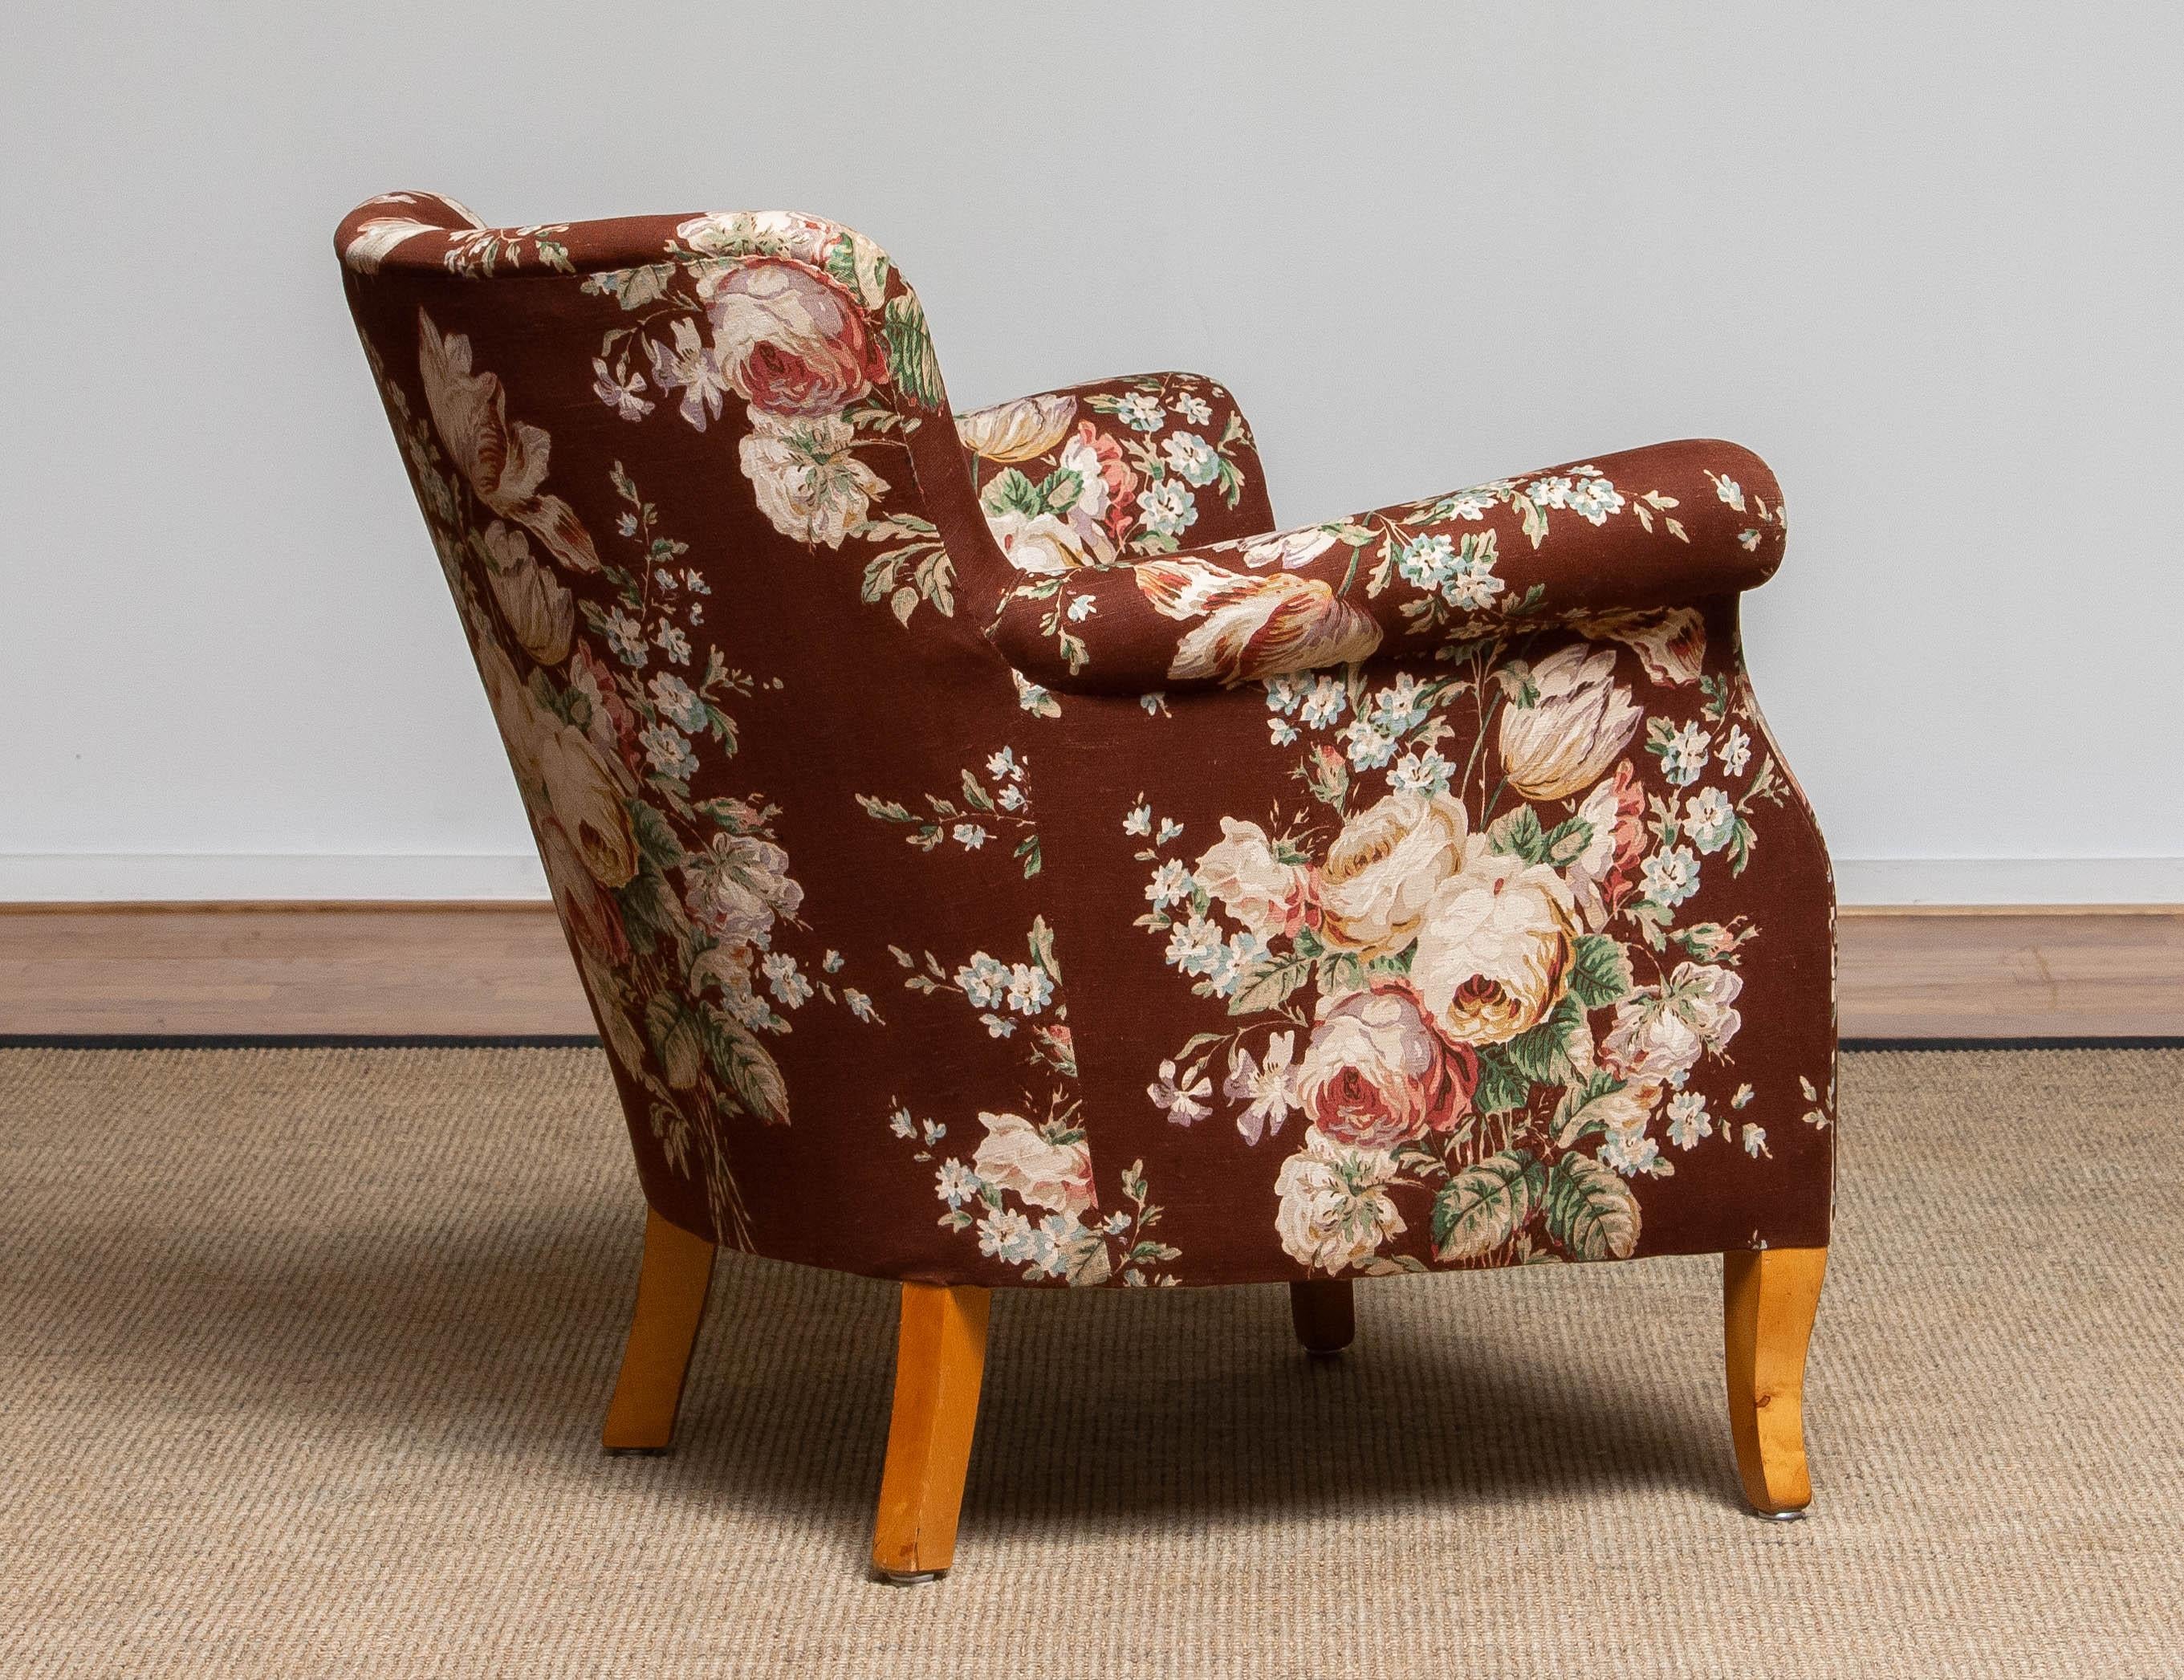 Swedish 1950s Scandinavian Floral Printed Brown Linen Lounge / Easy Chair from Sweden